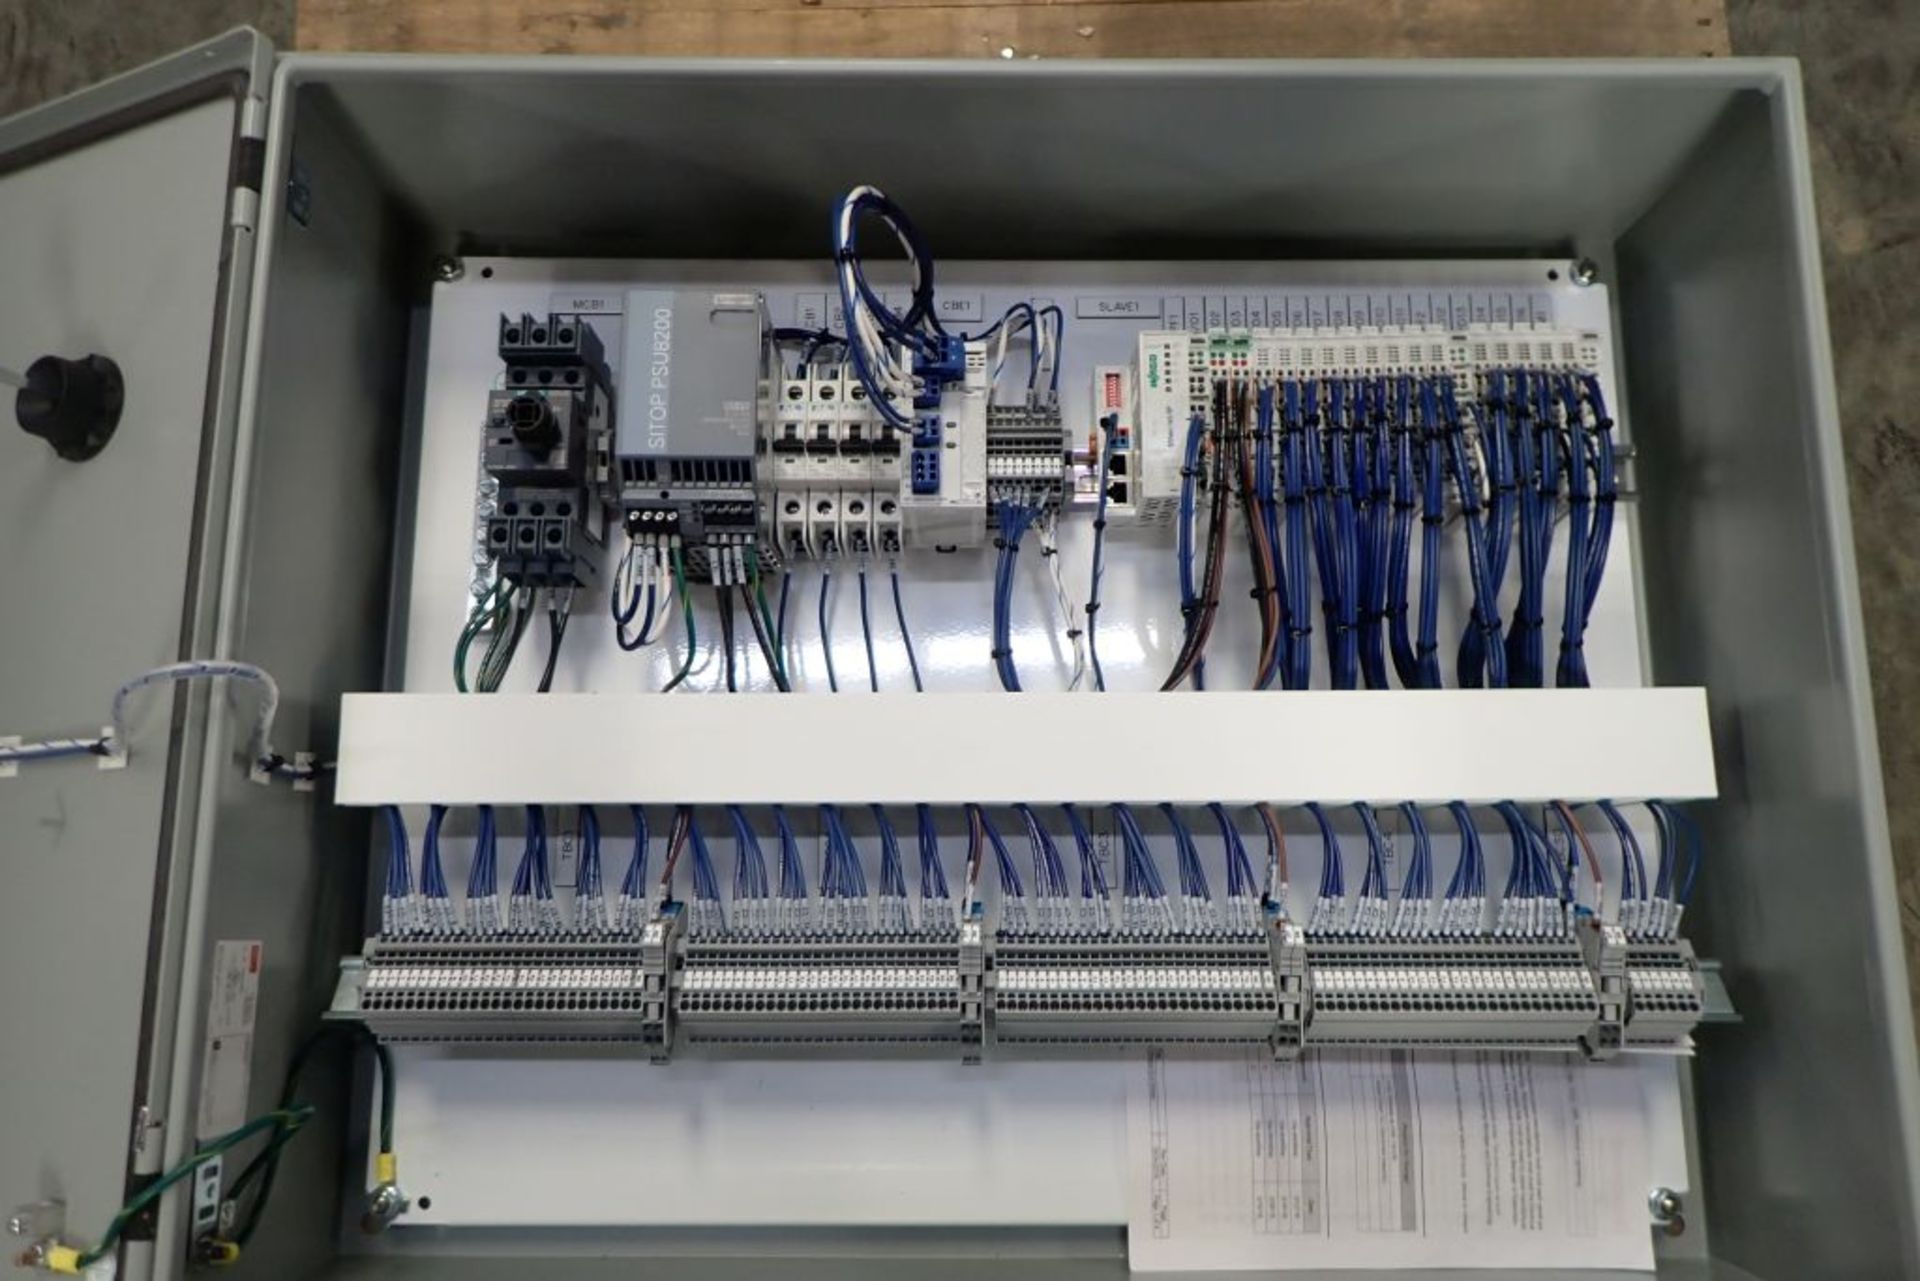 Hoffman Nvent Industrial Control Panel Enclosure with Contents - Image 4 of 6